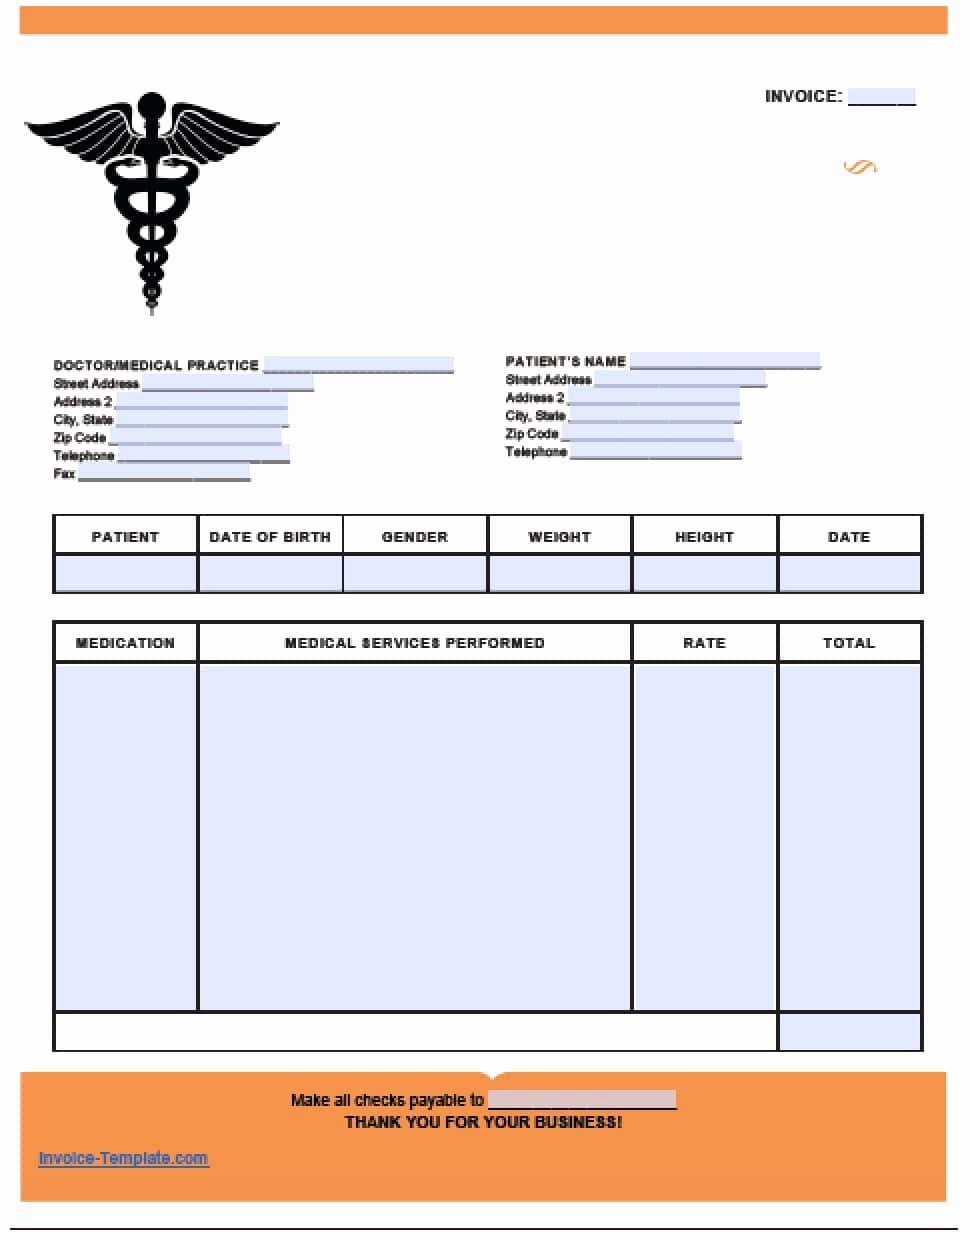 Invoice for Medical Records Template Inspirational Free Medical Invoice Template Excel Pdf